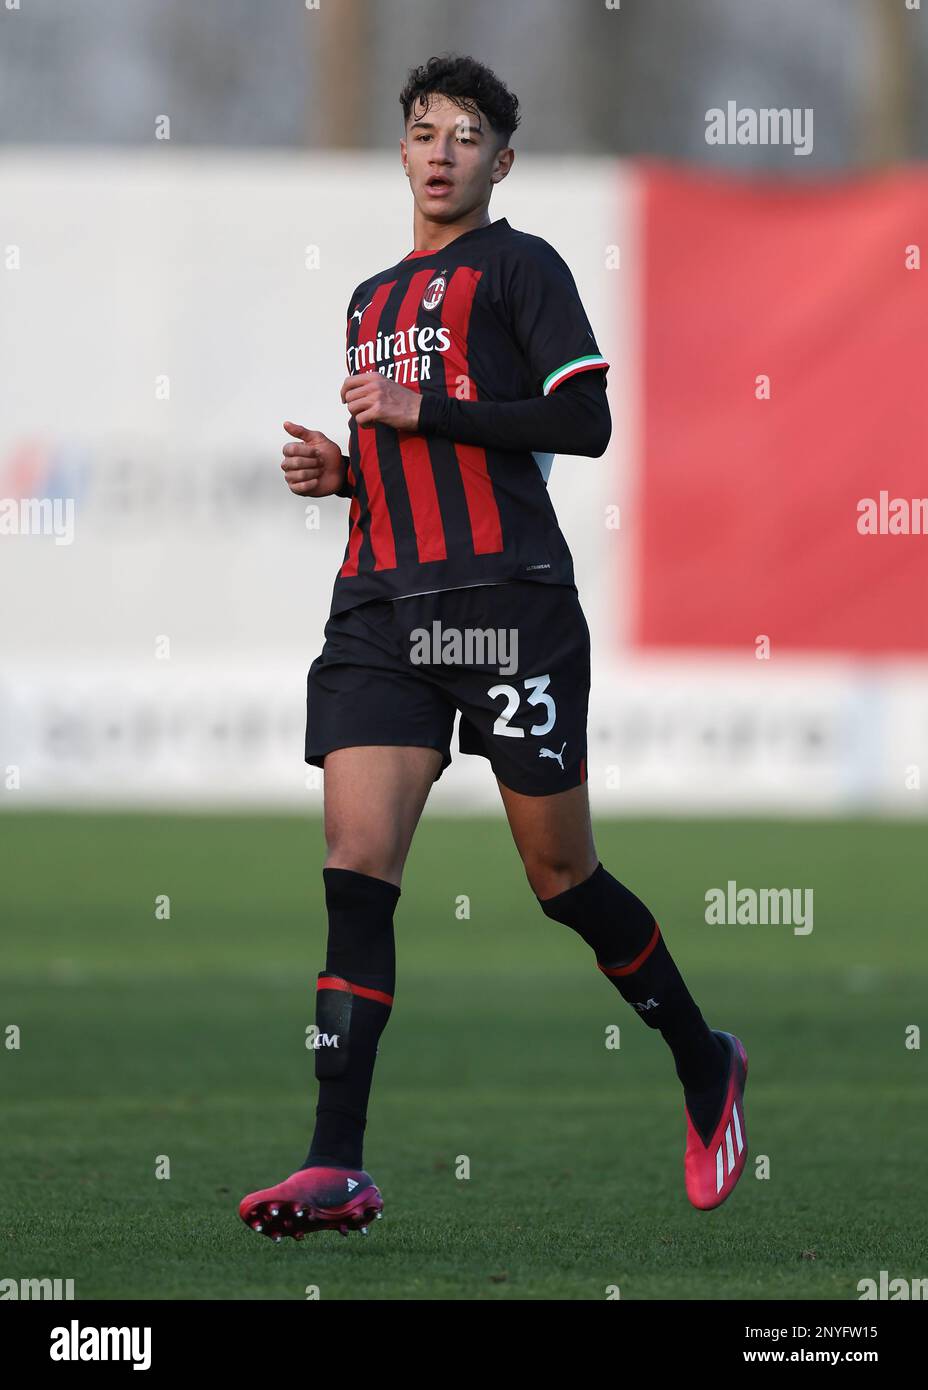 Adam Bakoune of AC Milan in action during the match between ACF News  Photo - Getty Images